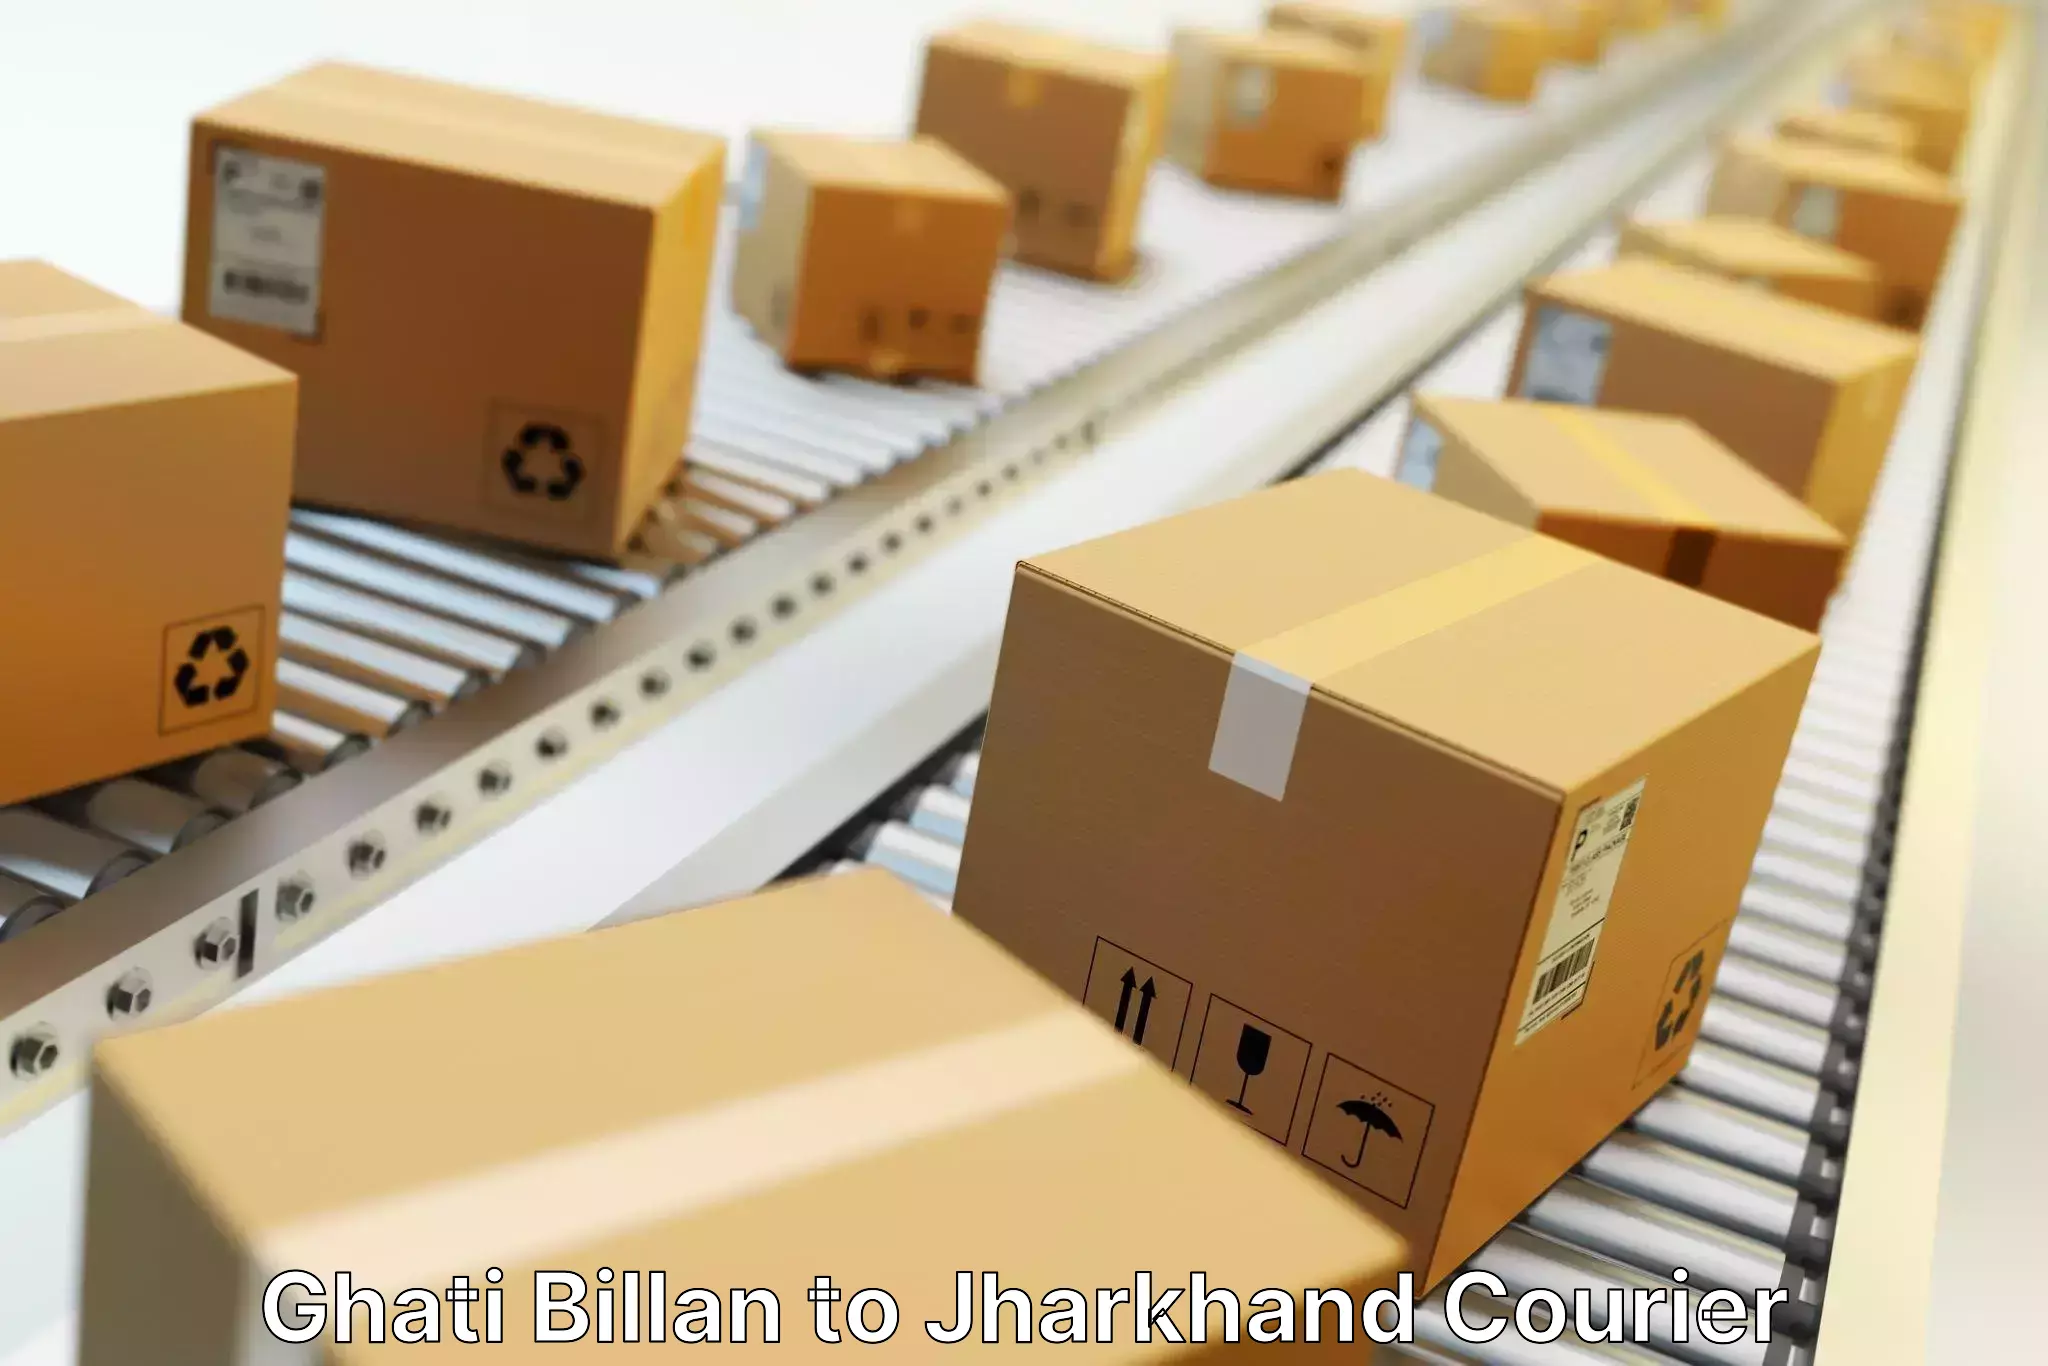 Automated parcel services Ghati Billan to Dhanbad